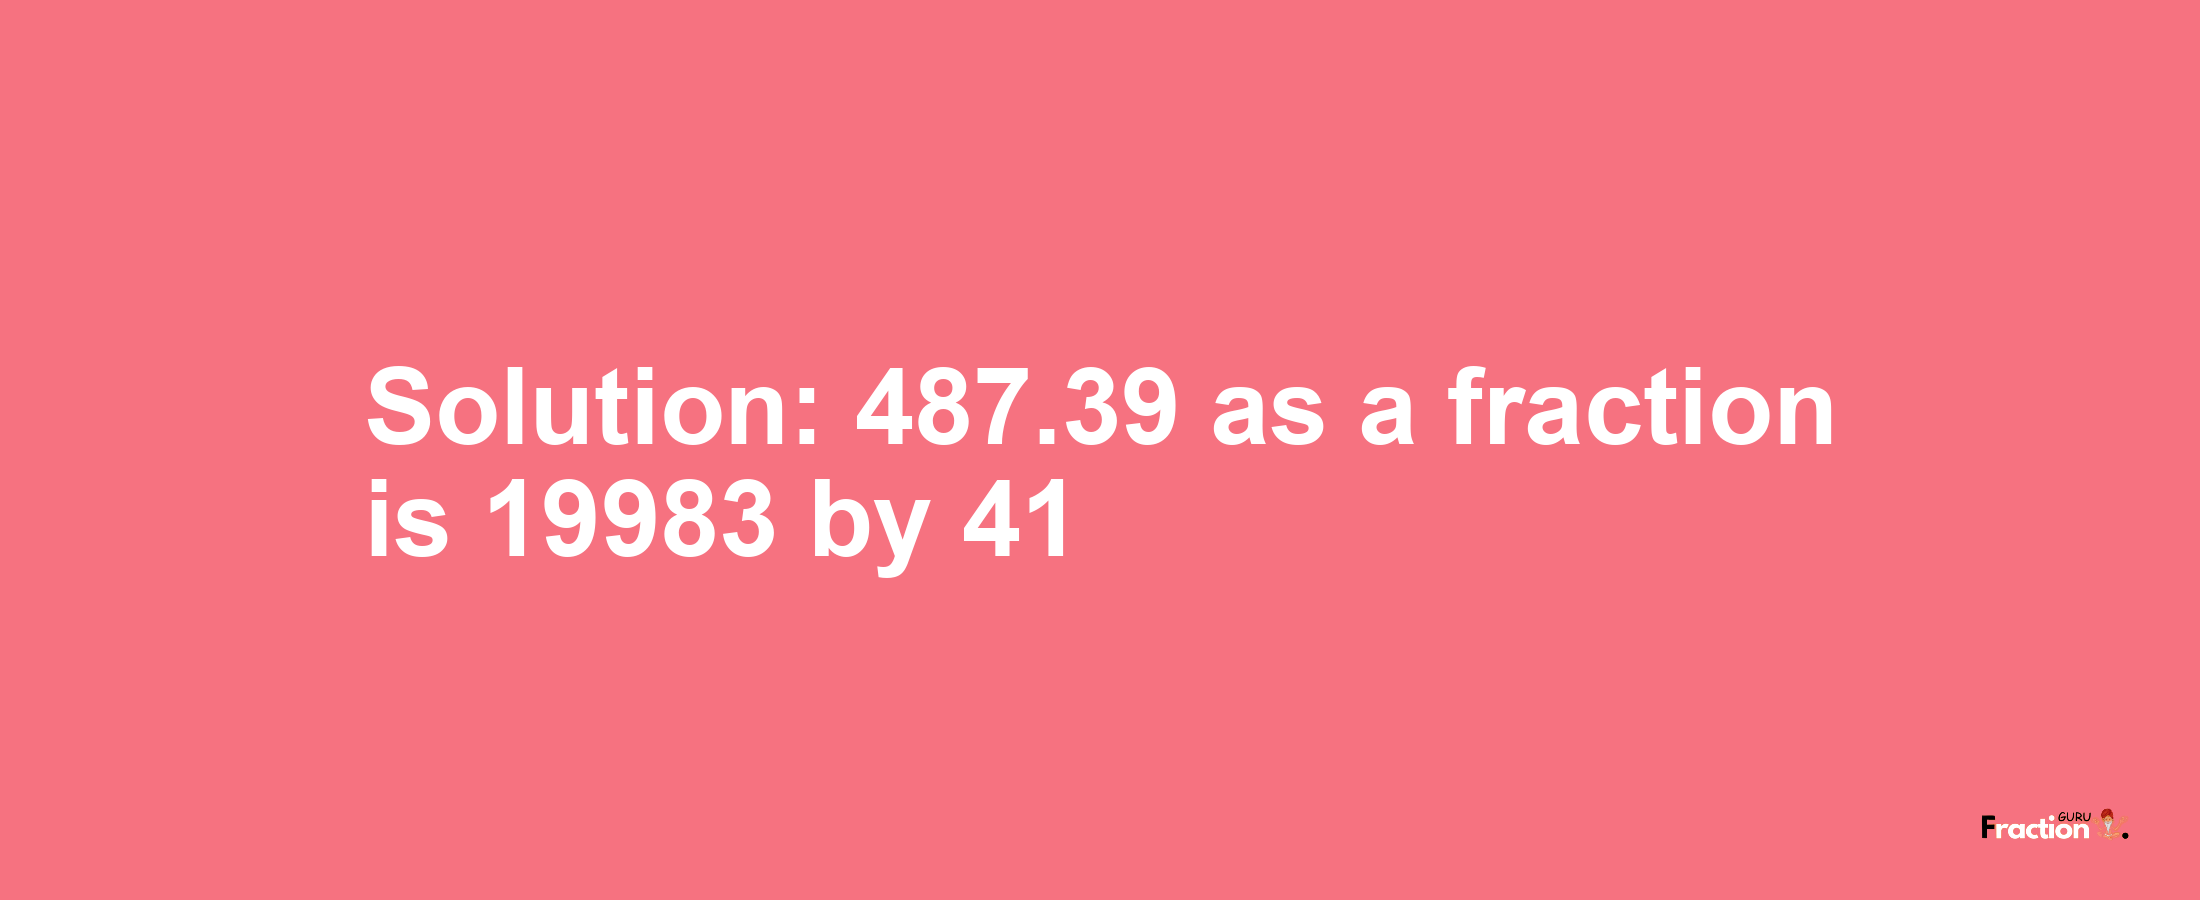 Solution:487.39 as a fraction is 19983/41